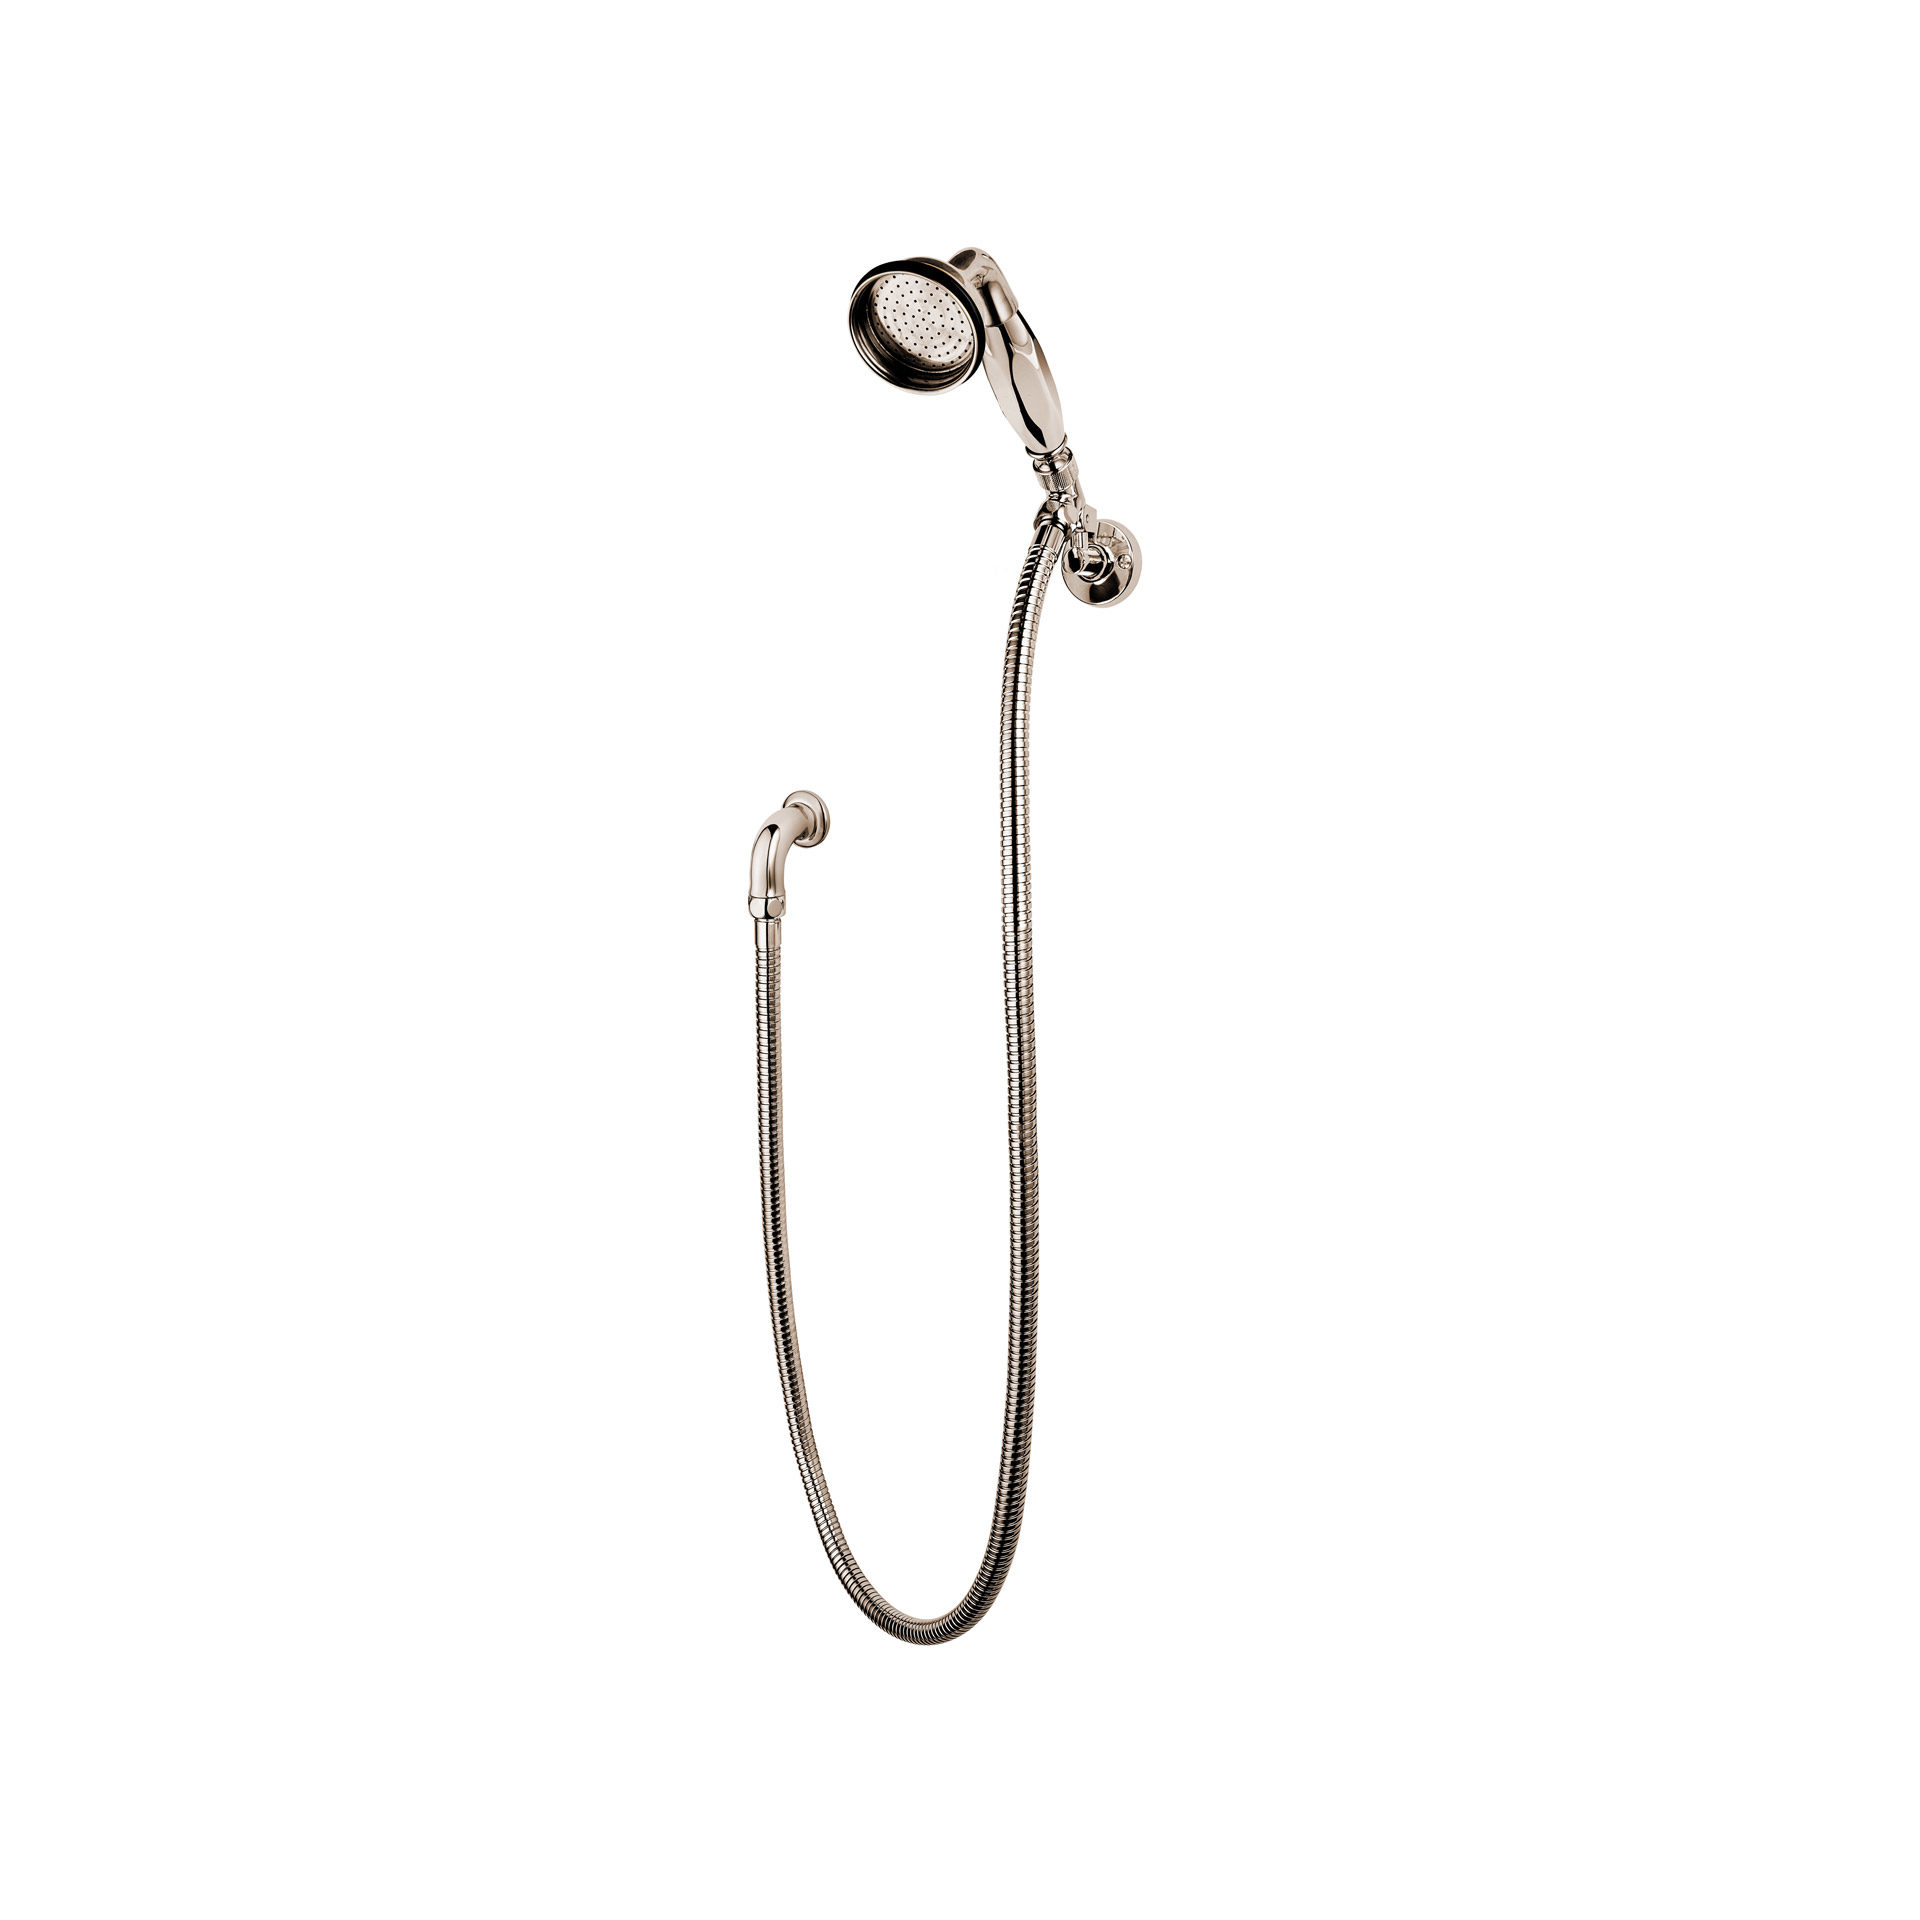 Regent Shower Hand Spray, Rose and Flexible Hose Mounted On a Swivel Hook